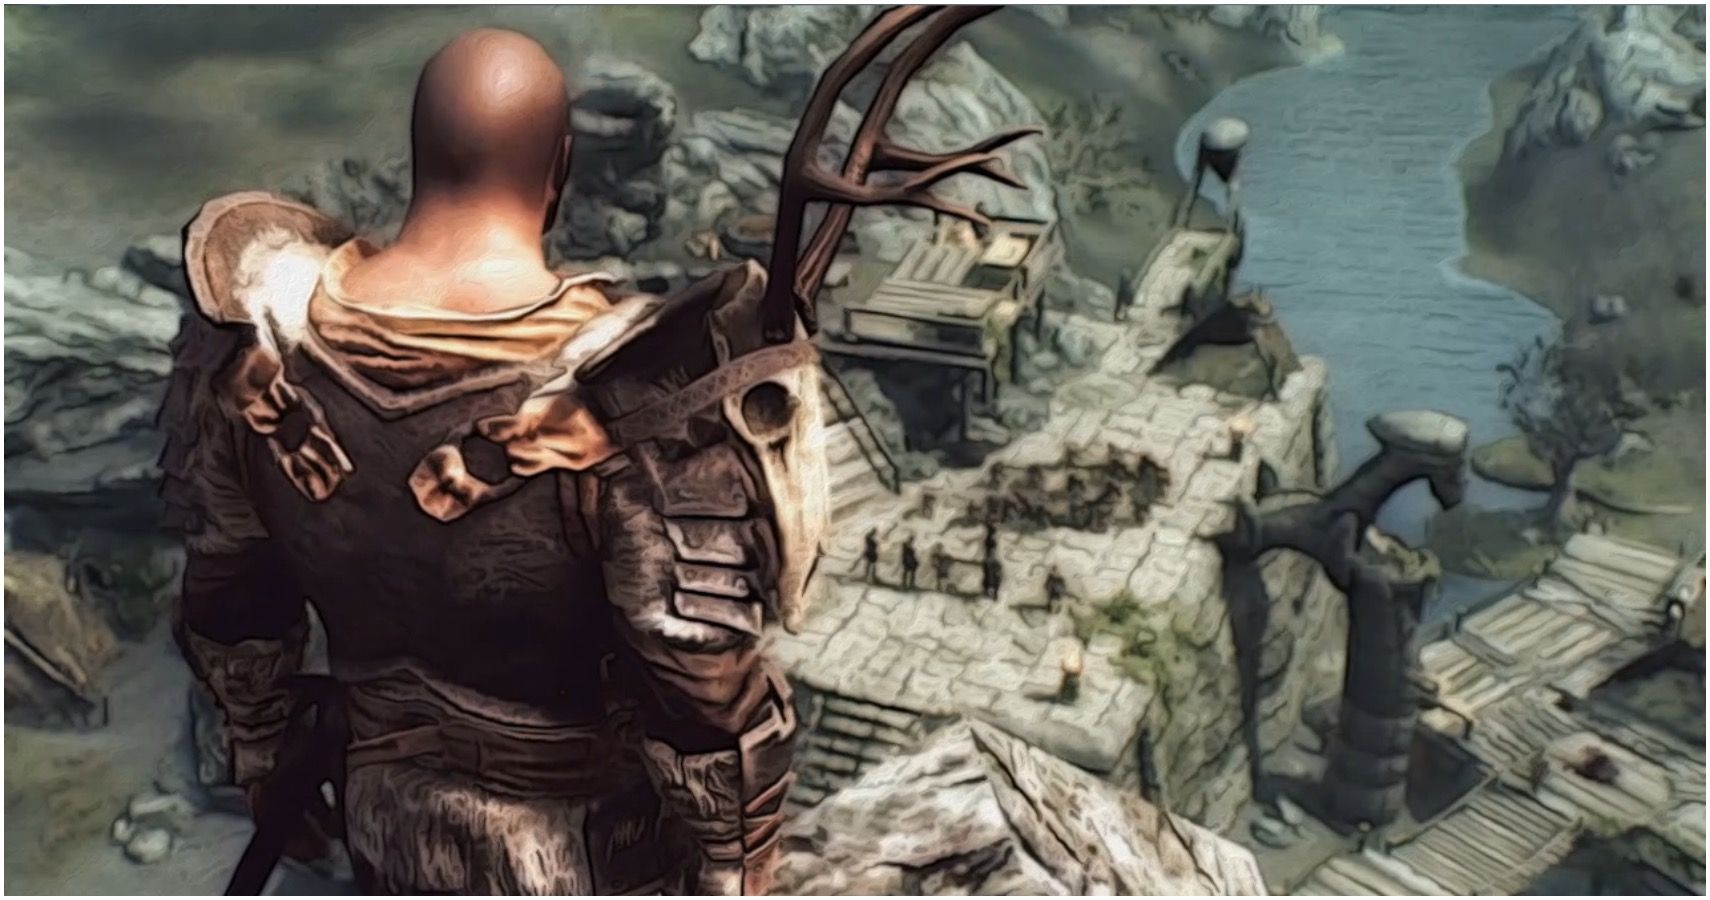 A Forsworn looking over ruins